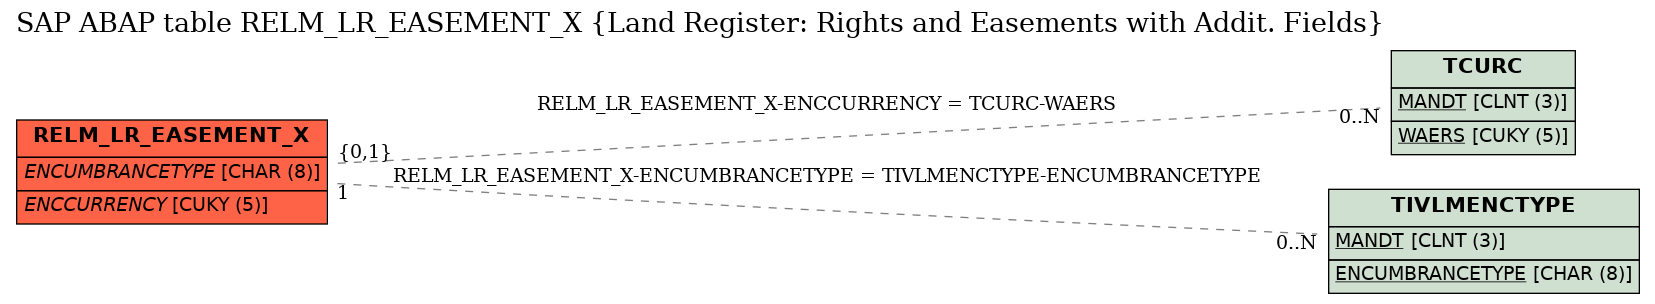 E-R Diagram for table RELM_LR_EASEMENT_X (Land Register: Rights and Easements with Addit. Fields)